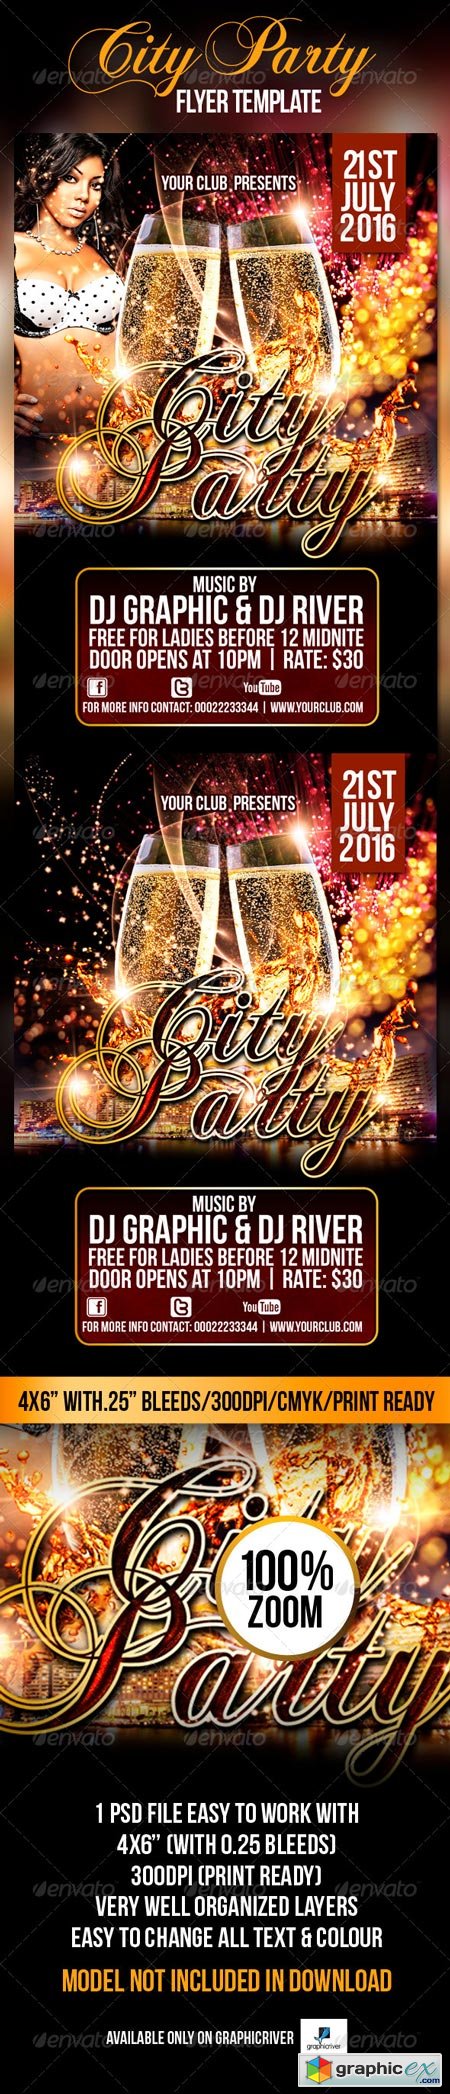 City Party Flyer Template 4344423